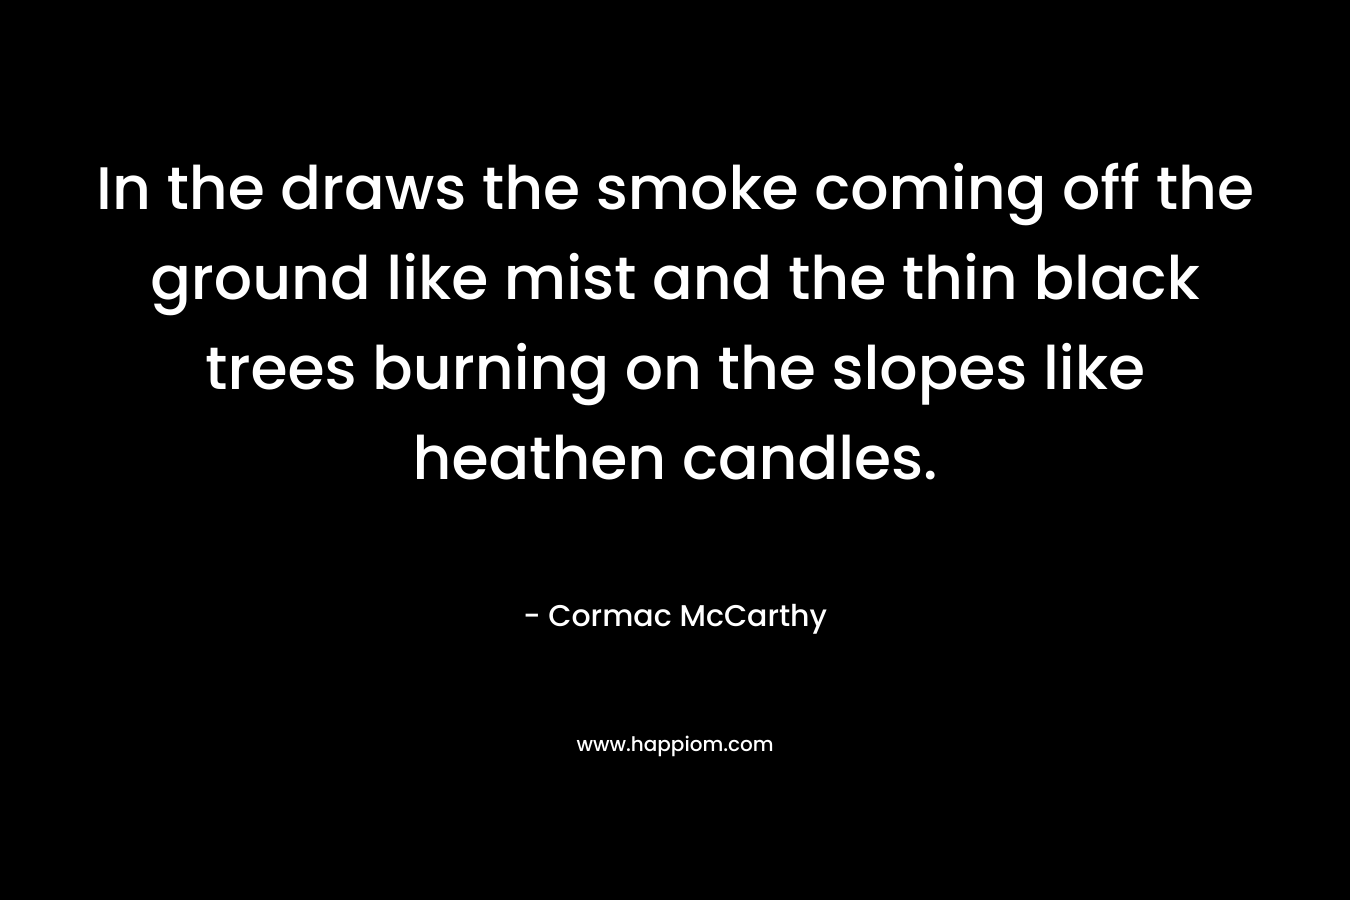 In the draws the smoke coming off the ground like mist and the thin black trees burning on the slopes like heathen candles. – Cormac McCarthy